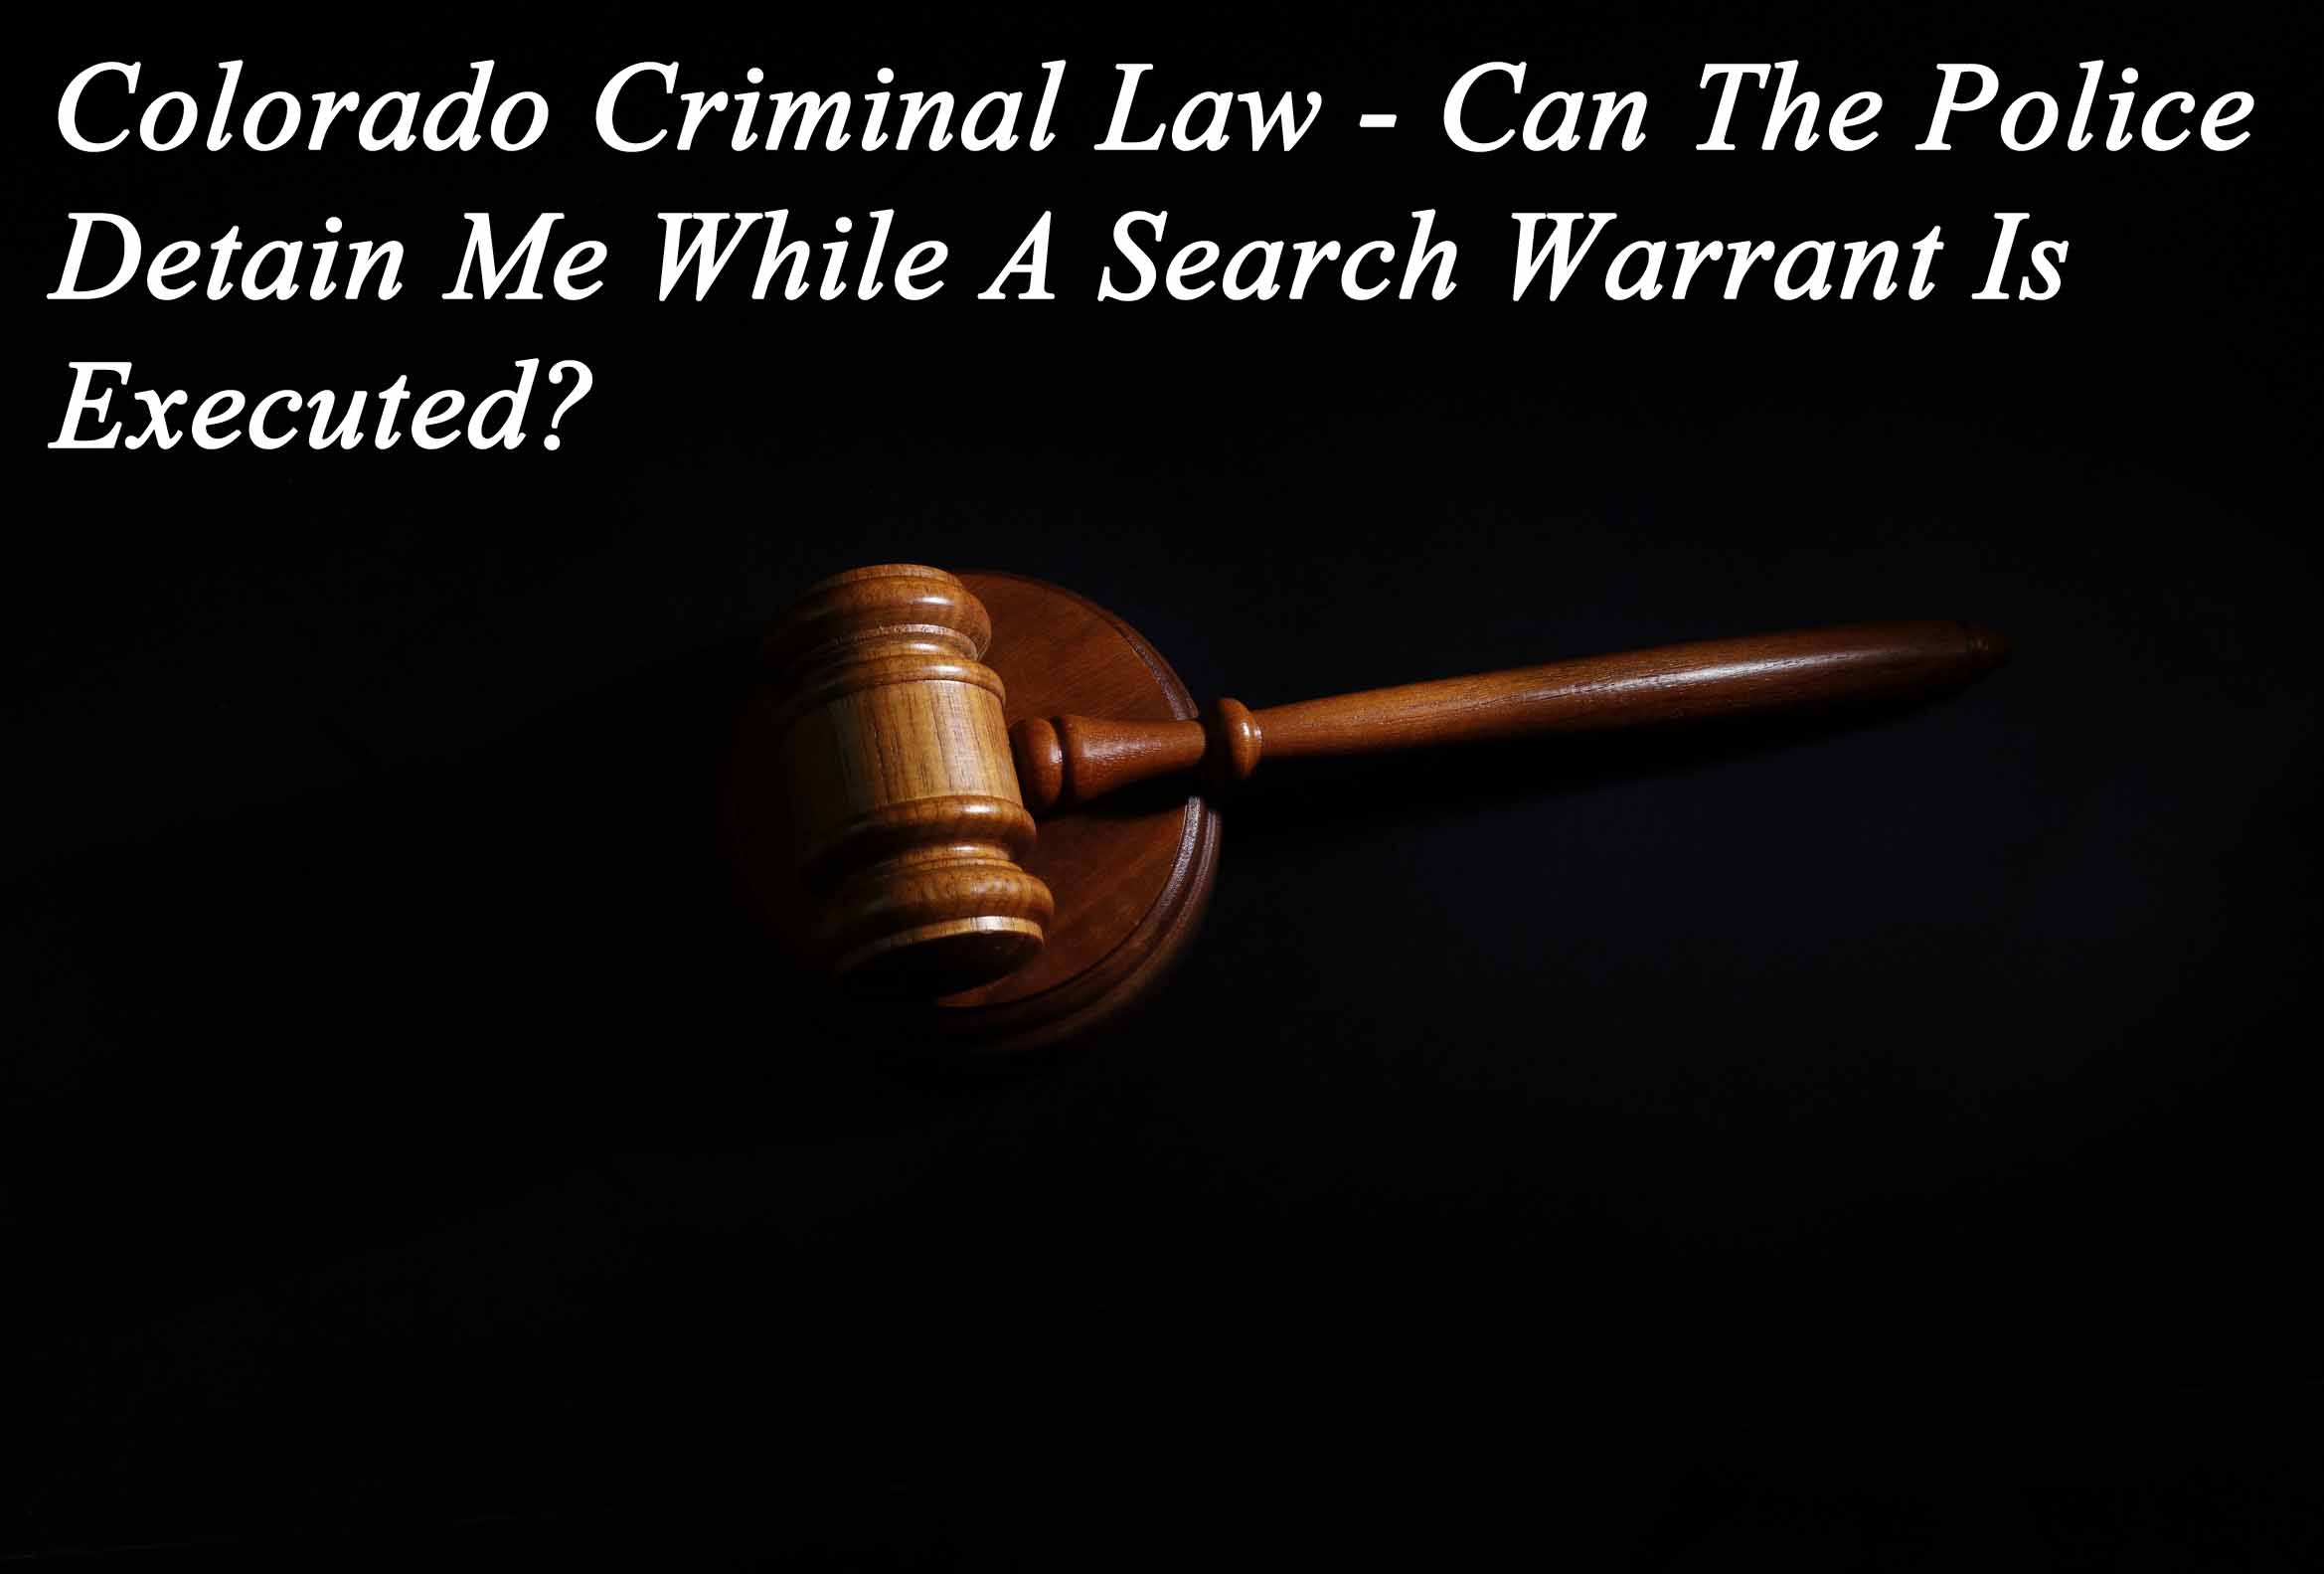 Colorado Criminal Law - Can The Police Detain Me While A Search Warrant Is Executed?